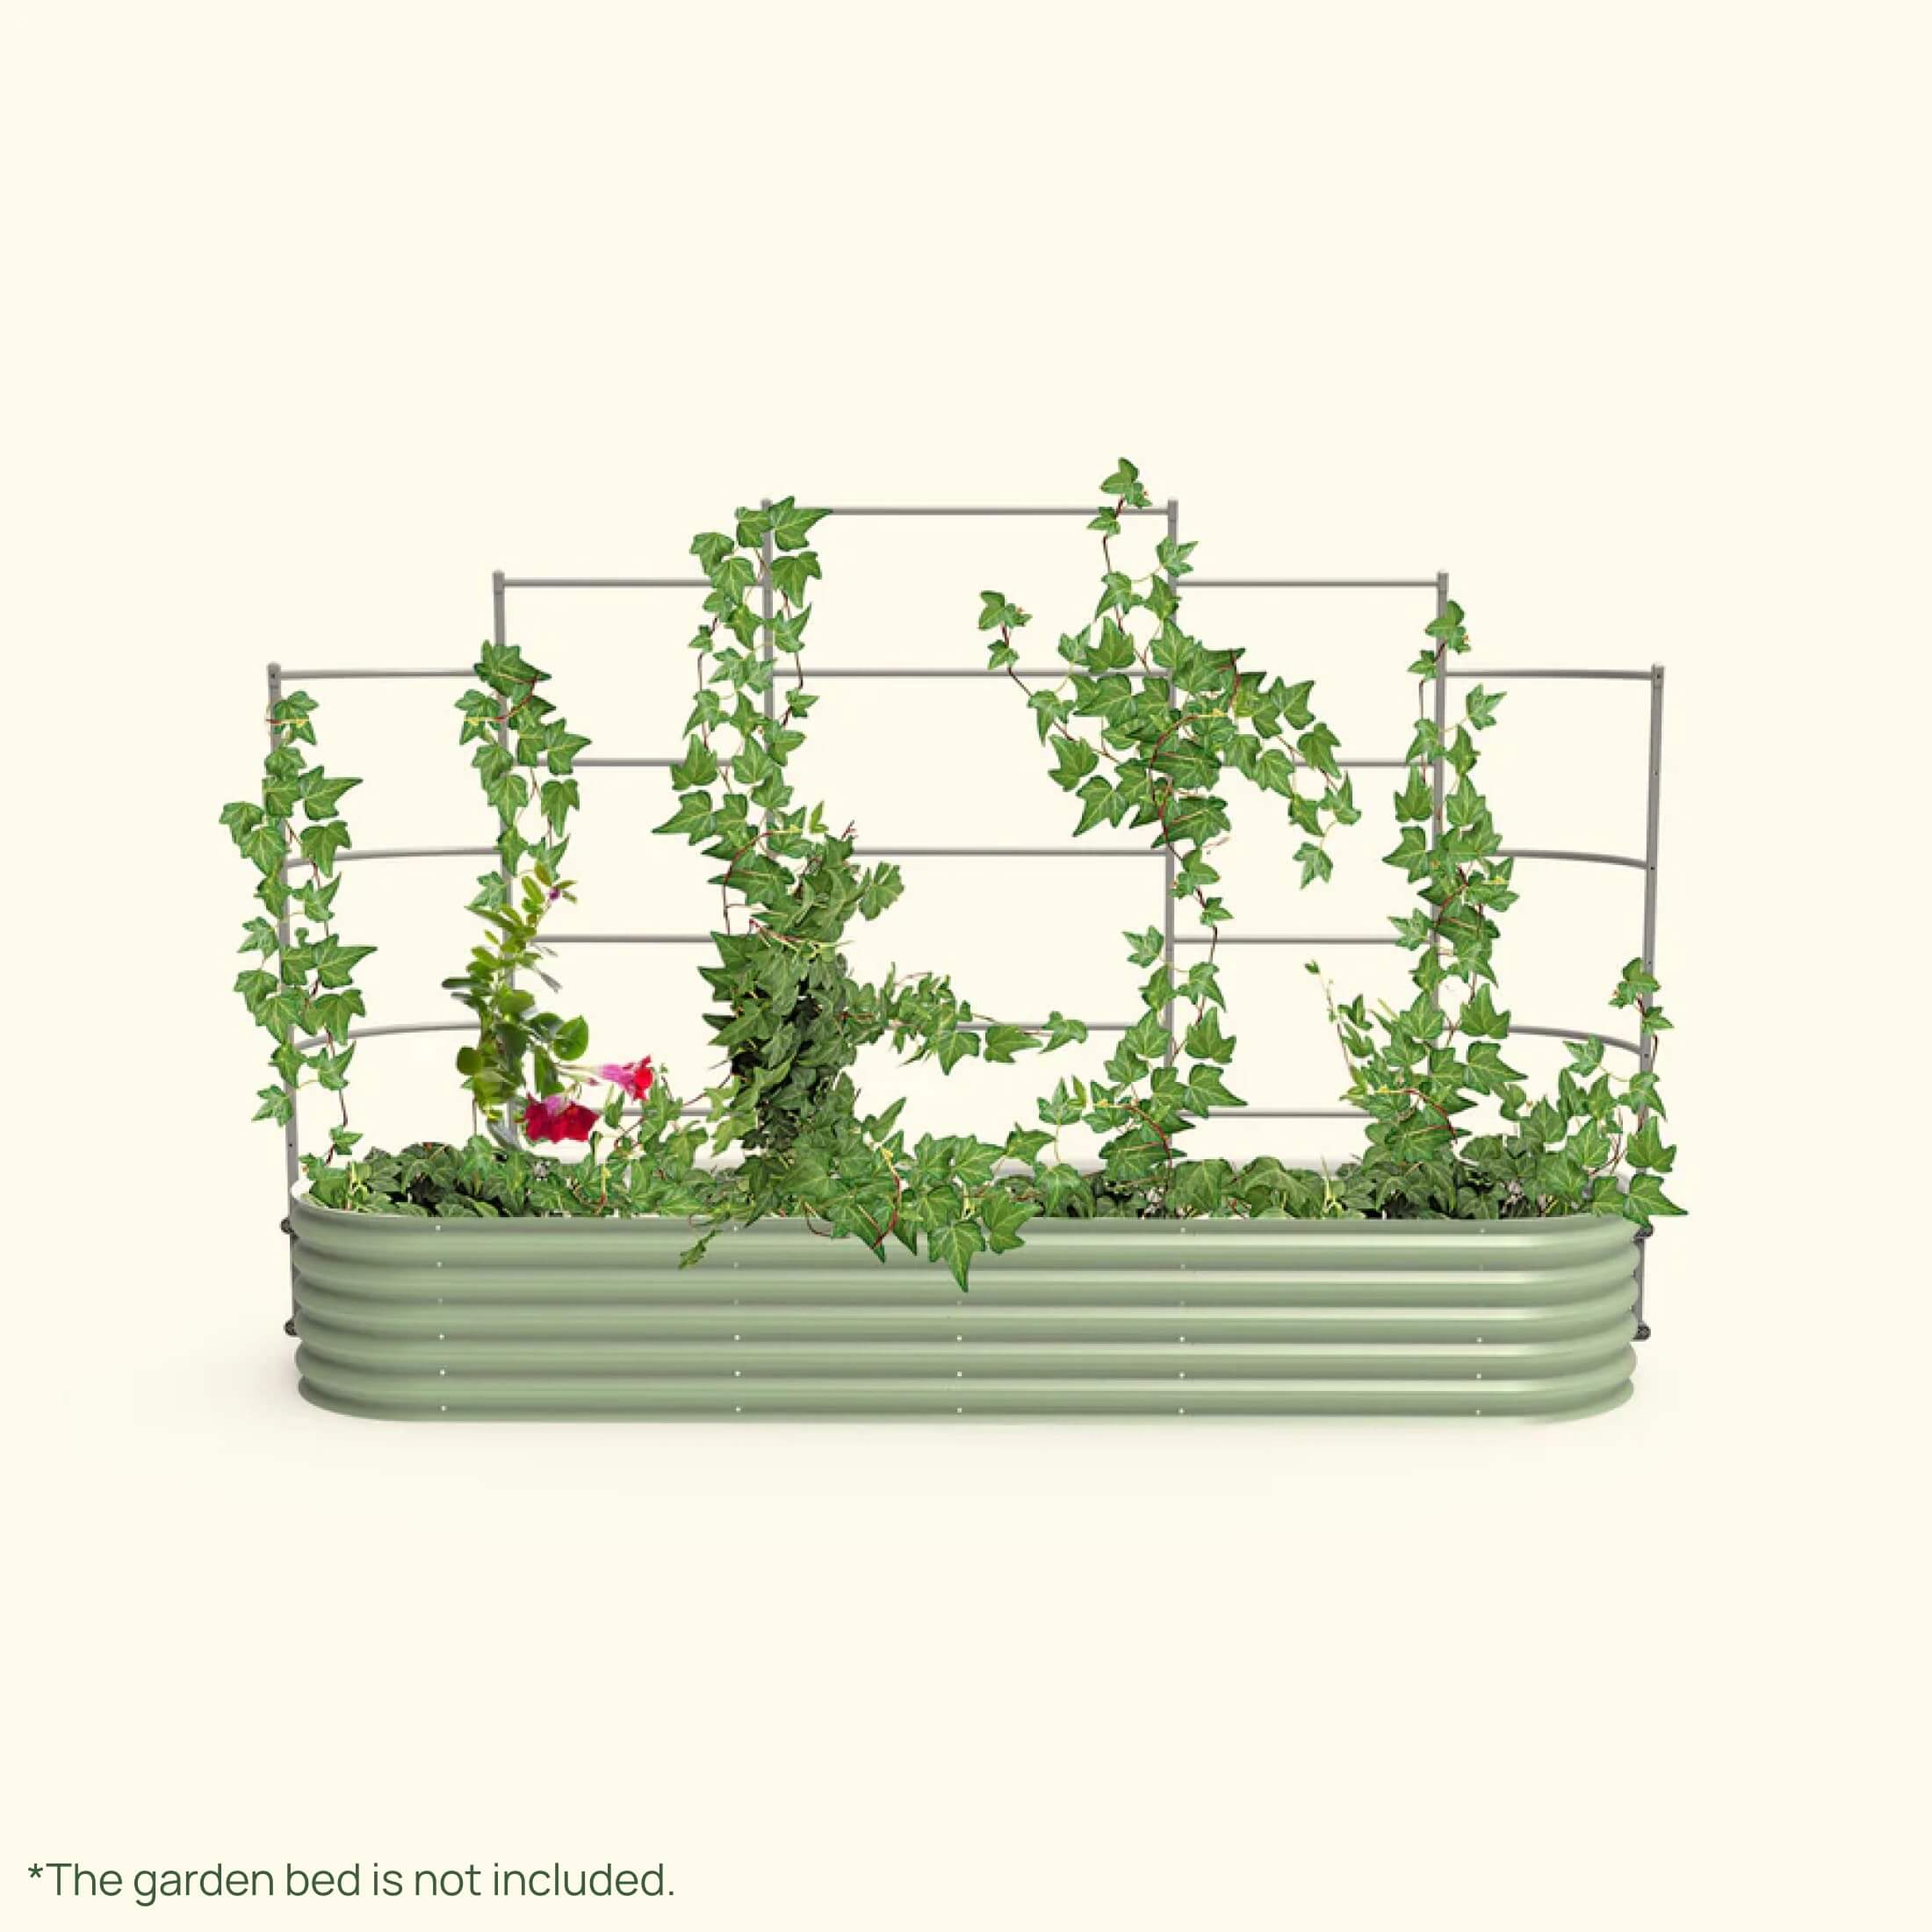 VWT95 - Five Section 9.5' Long for 2.5' x 9.5' Garden Beds